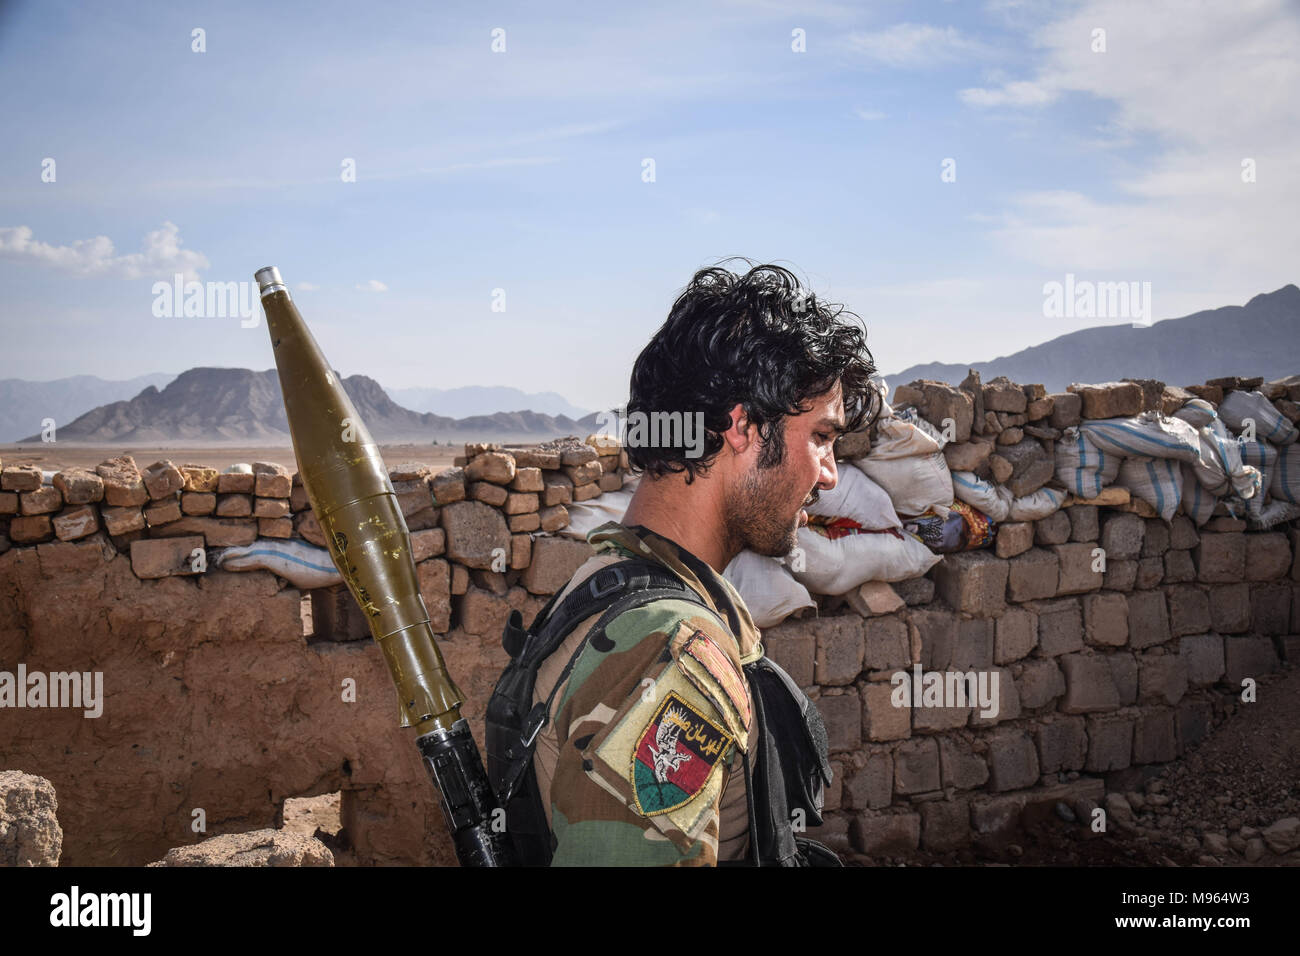 Afghan Commando with an RPG in the remains of an Afghan National Defence and Security Forces Outpost behind Farahrud Bazaar, just off the main road in Bolo Bluk district, Farah province. According to Afghan Commandos the outpost had been recently overrun and razed by Taliban who hold a nearby village. Afghanistan’s elite military forces – the Commandos and the Special Forces are one of the key elements in the Afghan and U.S. strategy to turn the grinding fight against the Taliban and other insurgents around. These pictures show the Commandos and Special Forces during training and in the field; Stock Photo